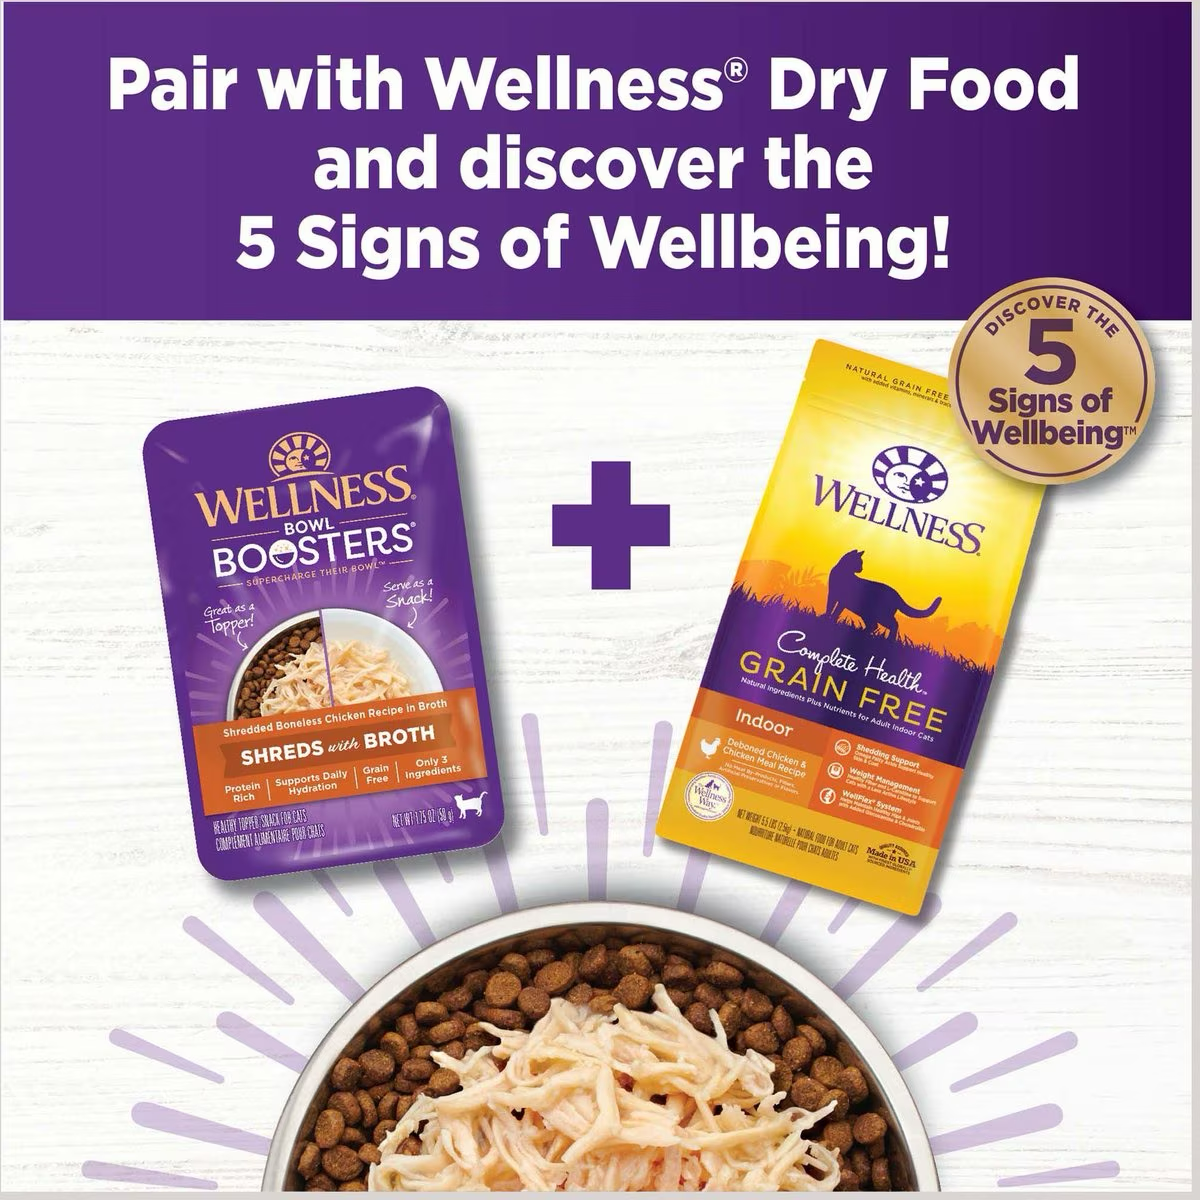 Wellness Bowl Boosters Shredded Chicken Wet Cat Topper  Canned Cat Food  | PetMax Canada